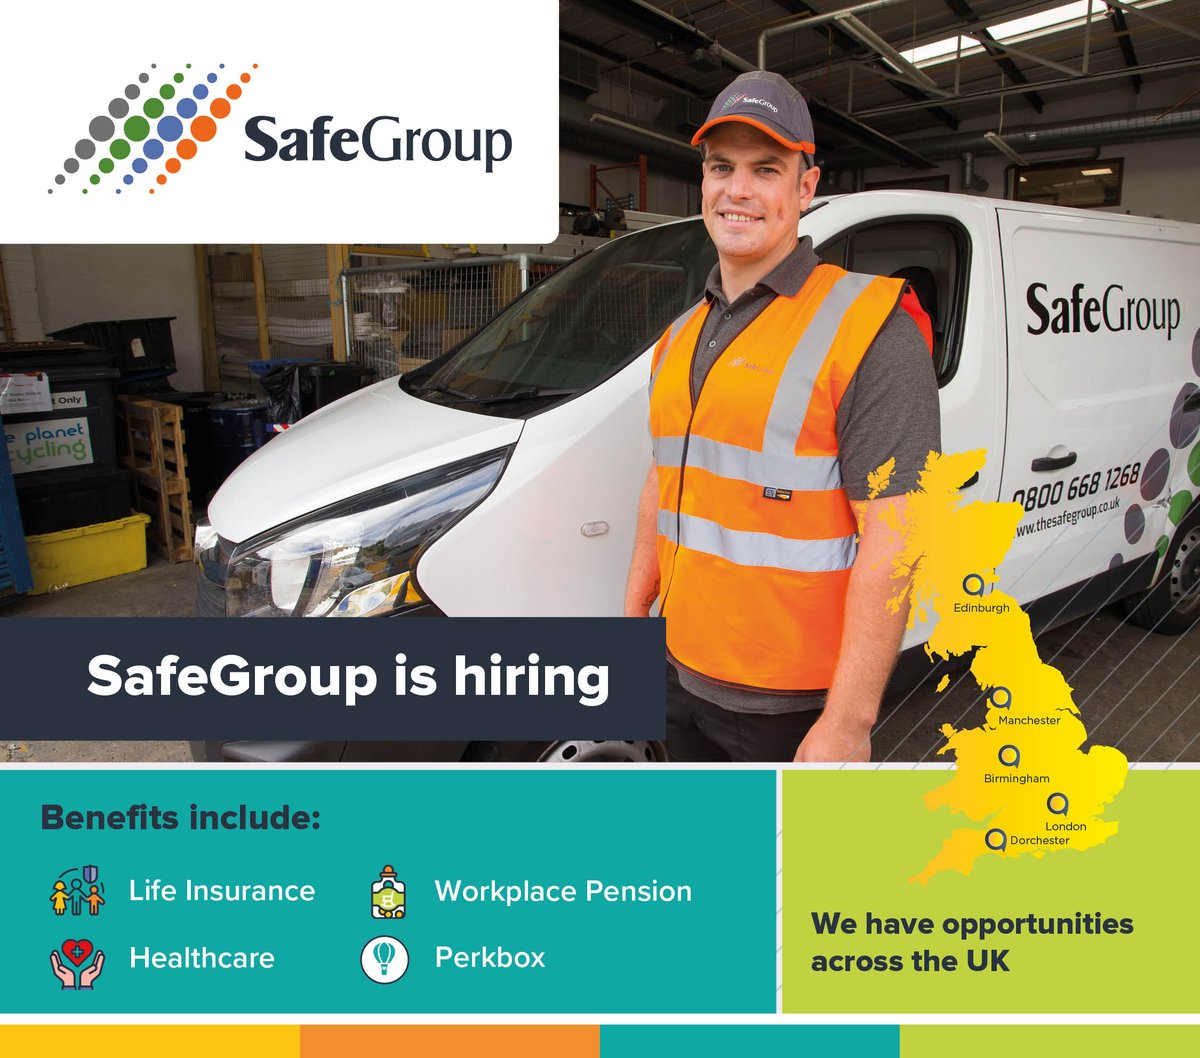 SafeGroup are recruiting for team members to deliver on new contracts secured for the future.  Long term prospects with a nice benefits package.   Jon and Rosa are the recruitment team waiting to hear from you. #SafeGroup #Jobs #Careers #Contractwins
uk.indeed.com/jobs?q=SafeGro…